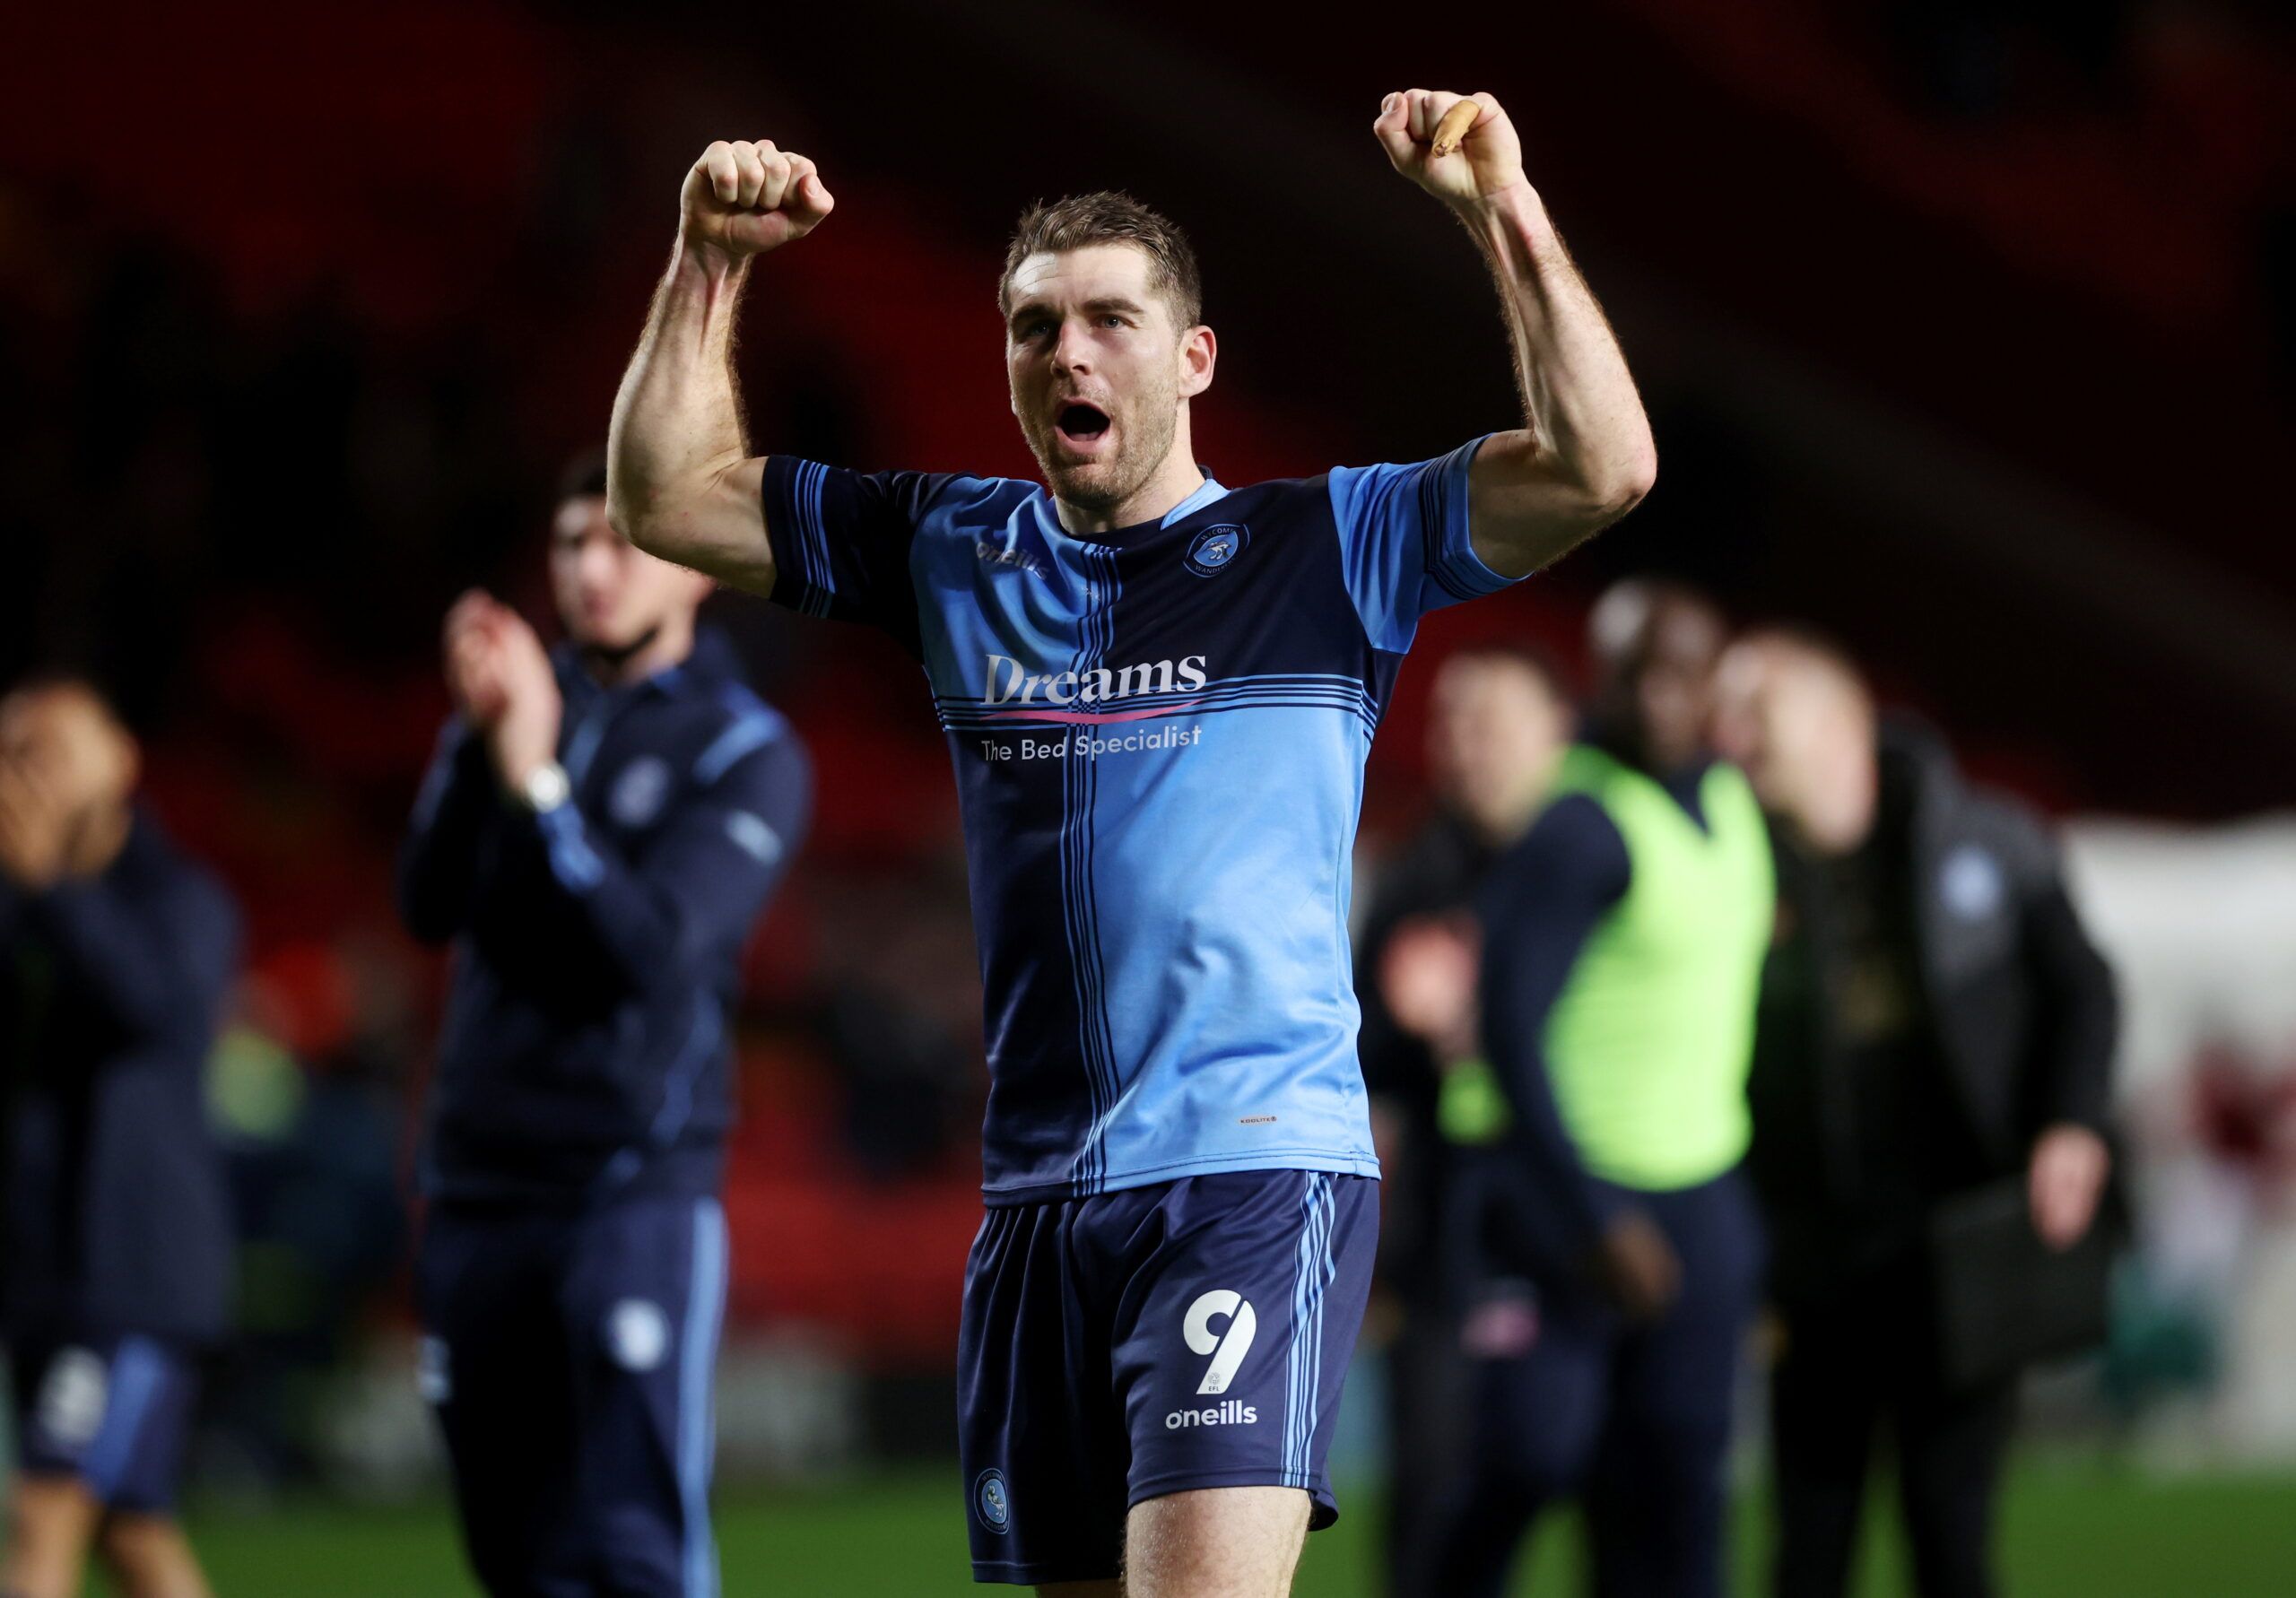 Soccer Football - League One - Charlton Athletic v Wycombe Wanderers - The Valley, London, Britain - January 1, 2022 Wycombe Wanderers' Sam Vokes celebrates after the match     Action Images/Matthew Childs  EDITORIAL USE ONLY. No use with unauthorized audio, video, data, fixture lists, club/league logos or 